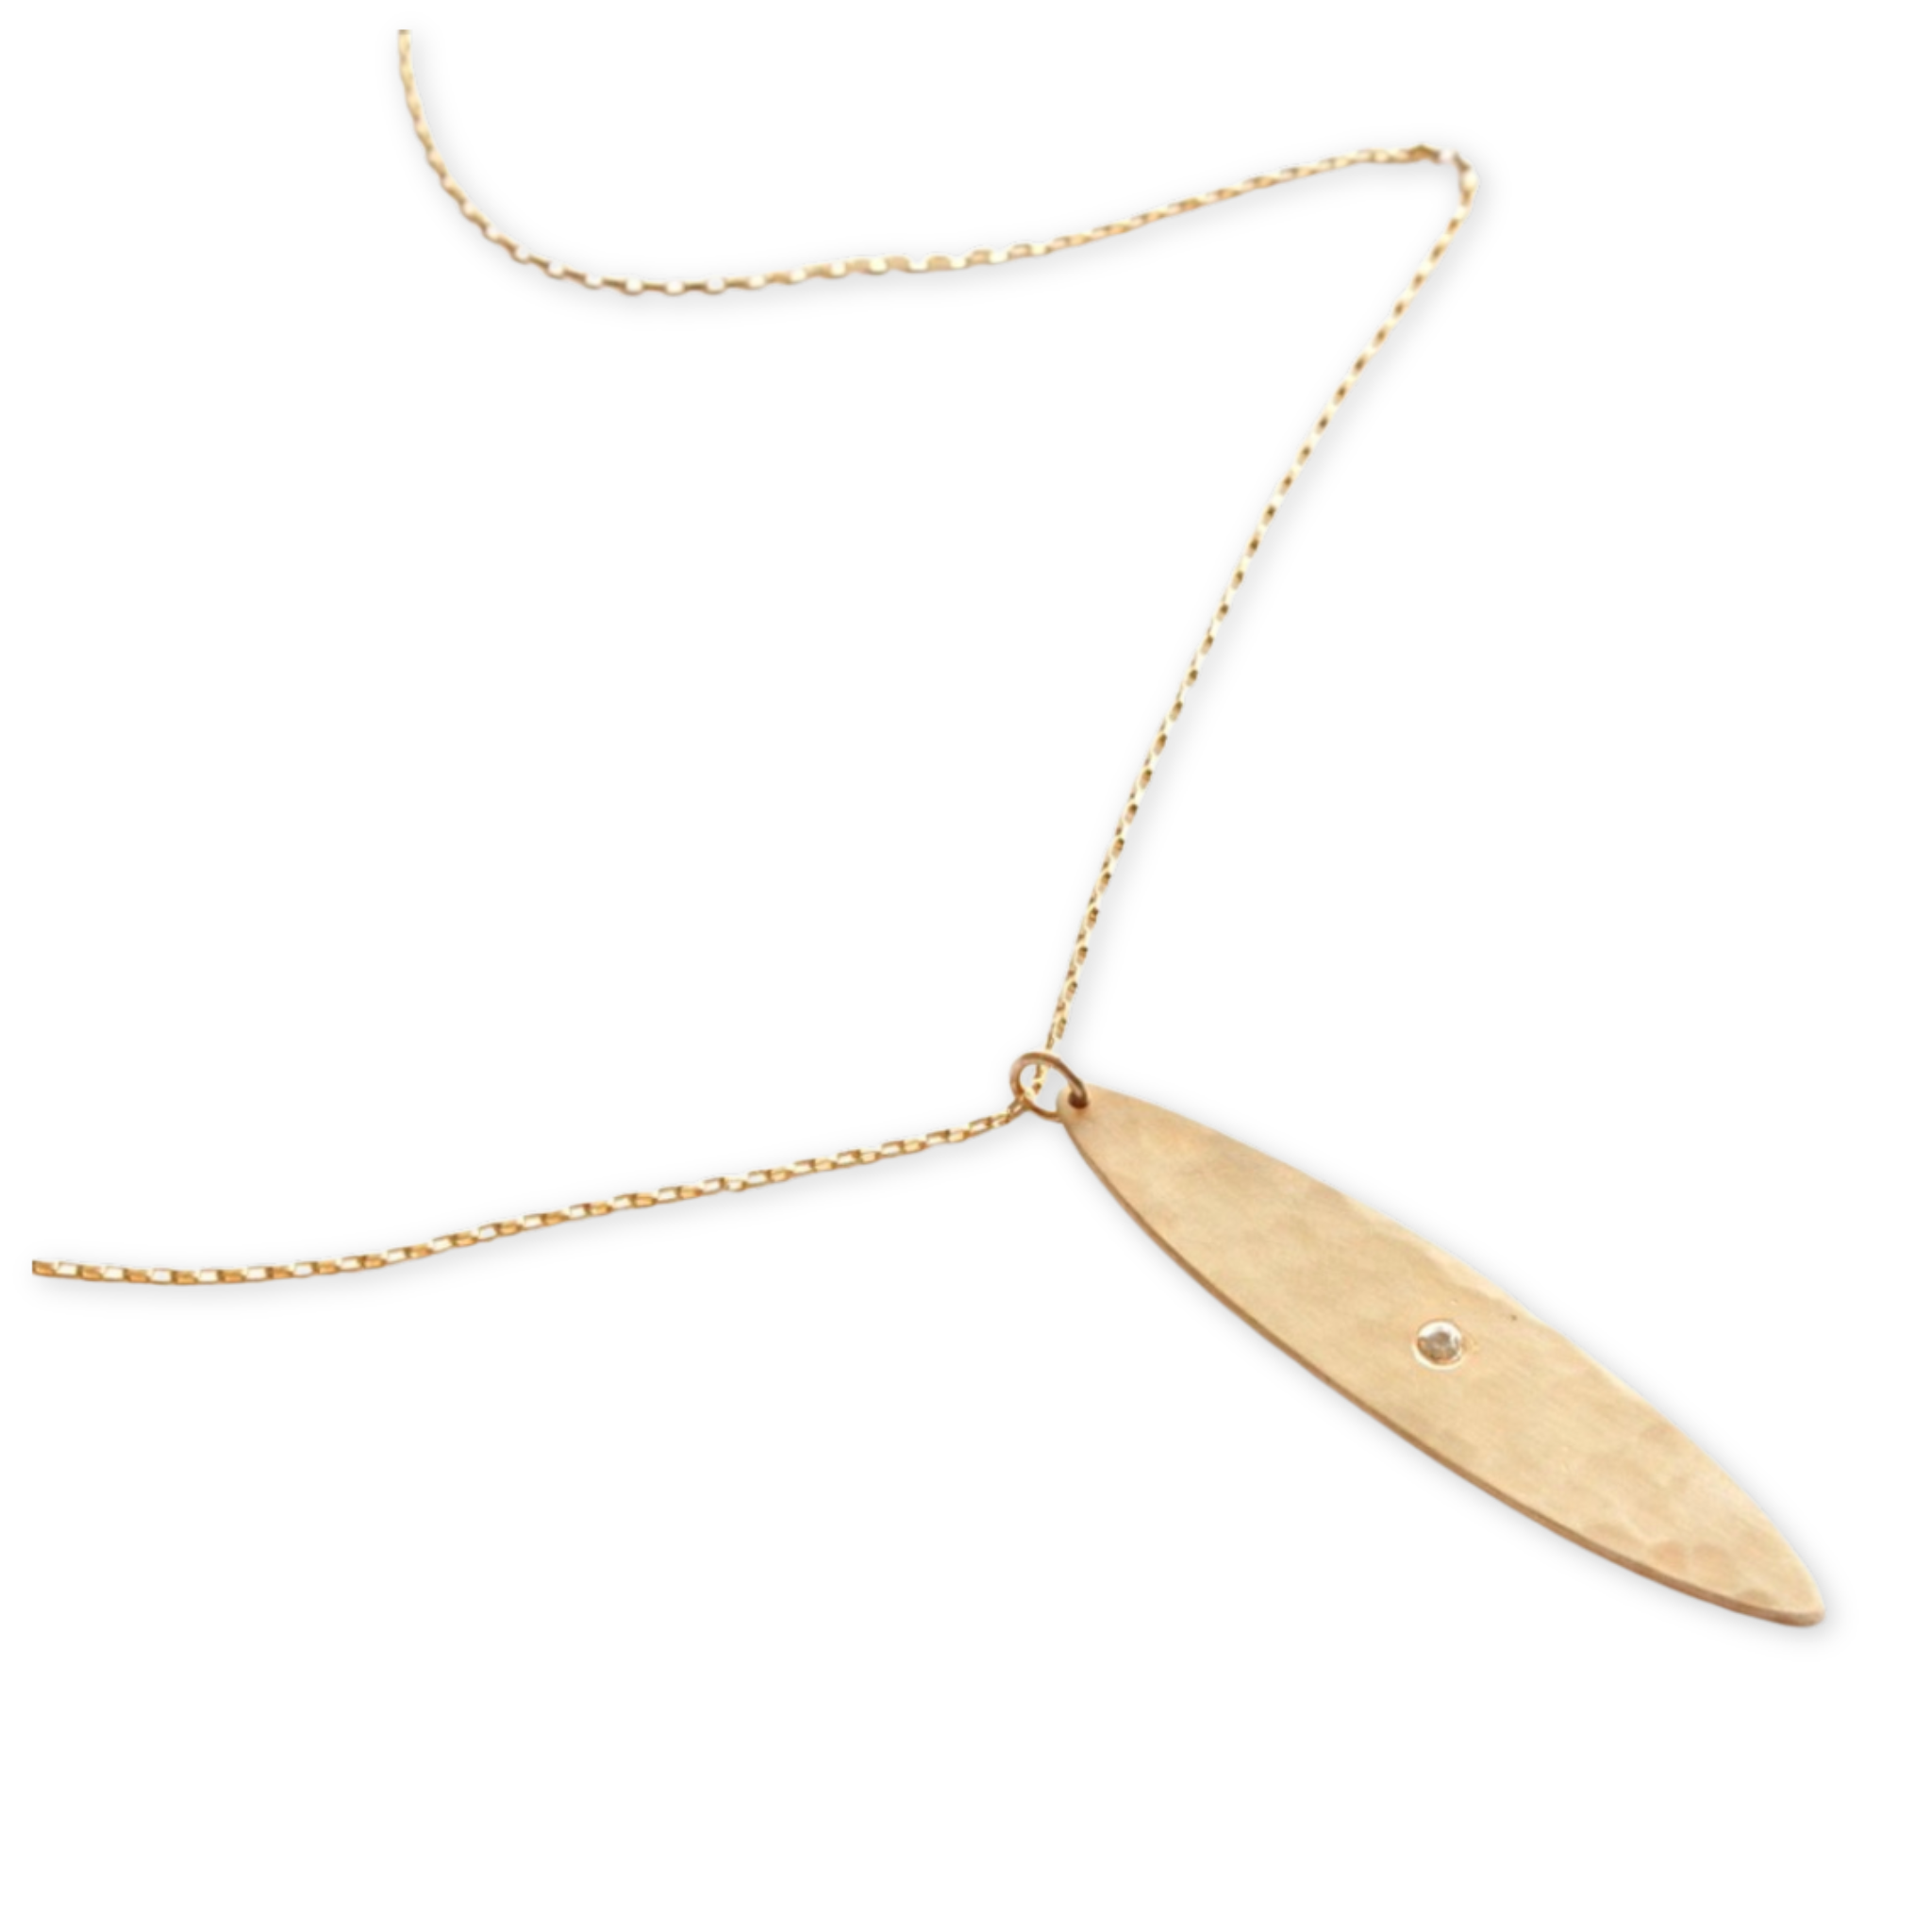 hammered long pea pod shaped pendant with a swavorksi cubic zirconia stone suspended on a delicate chain necklace